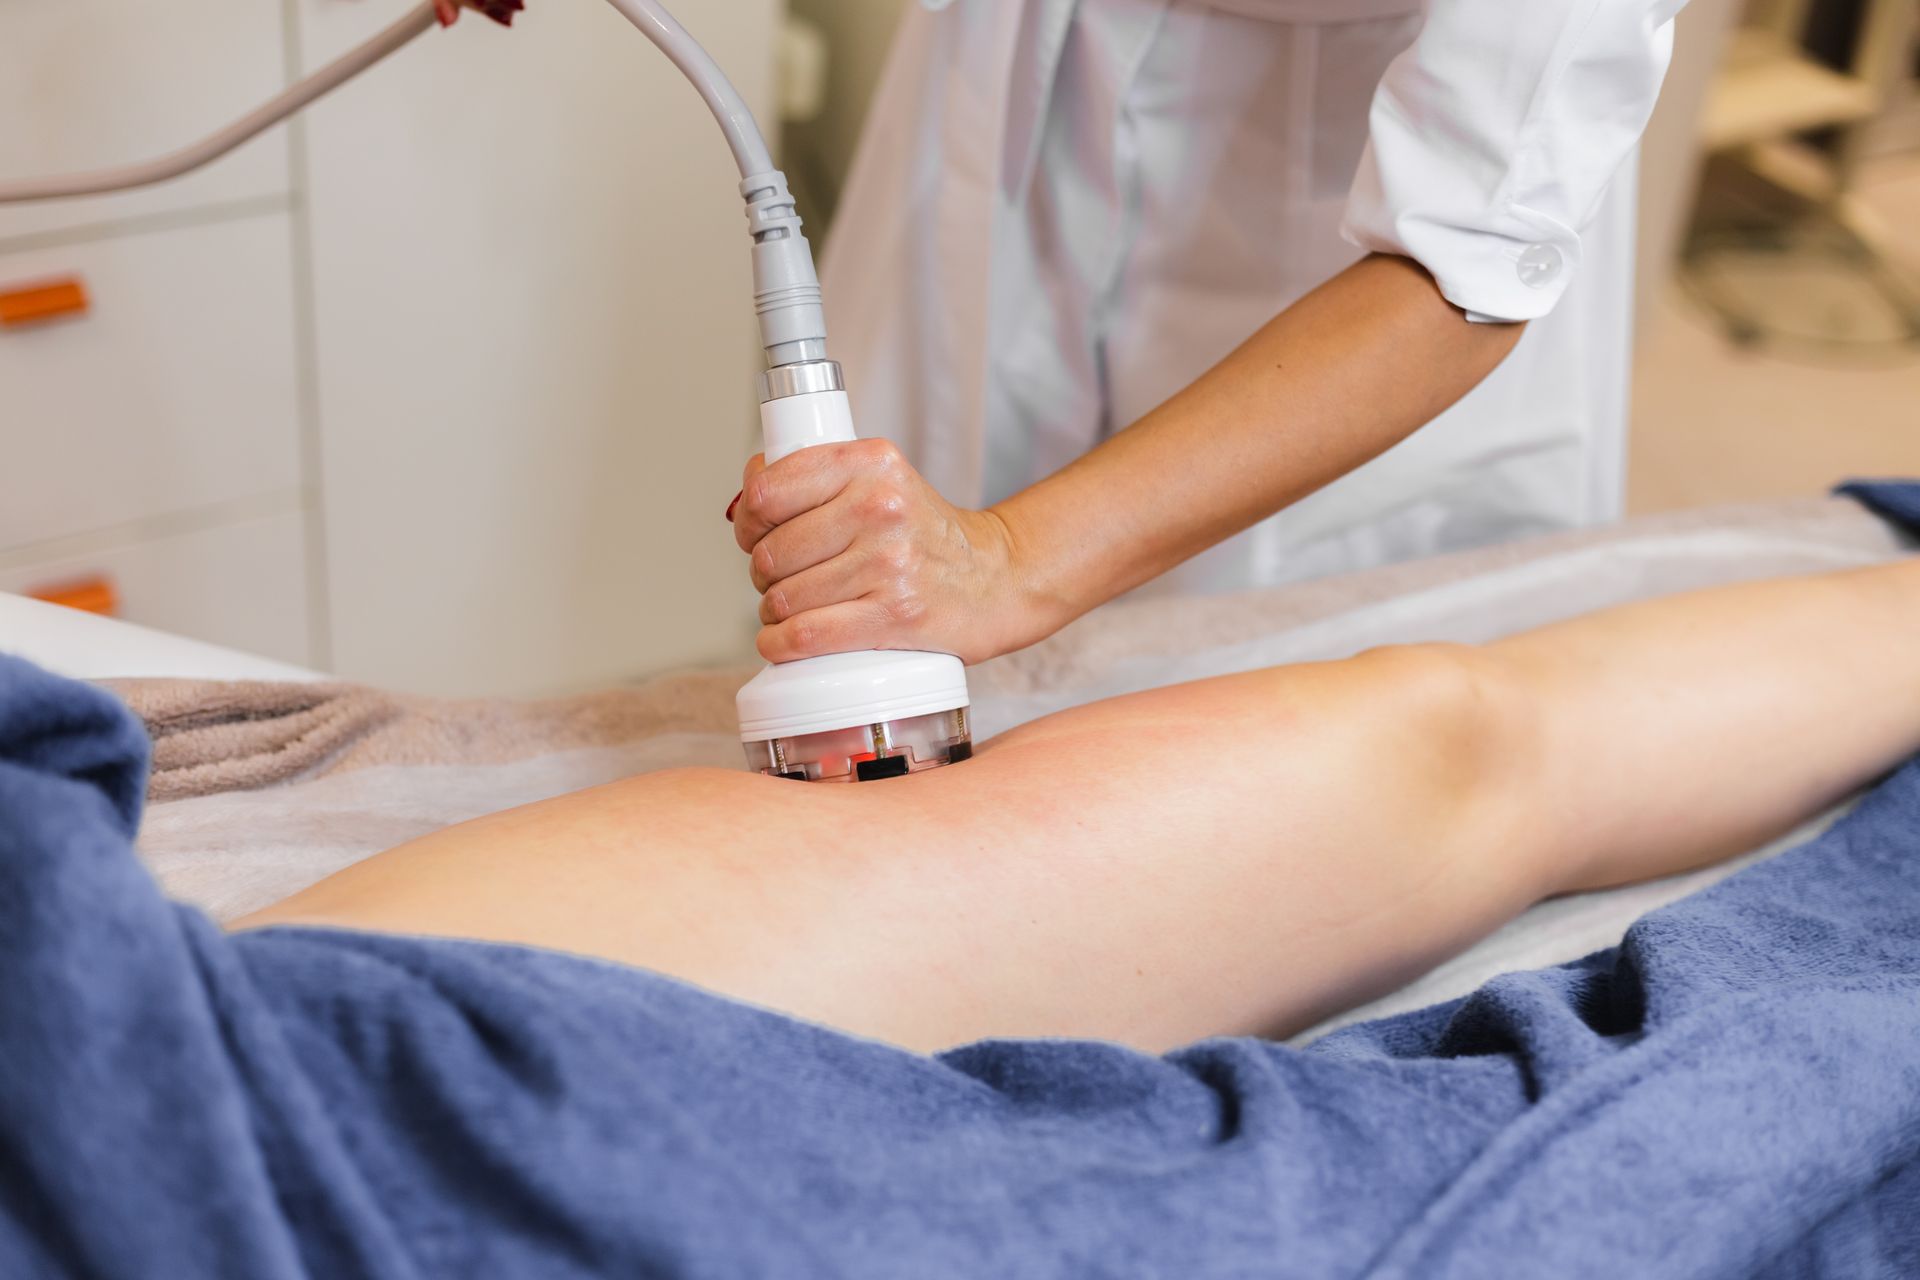 Laser Lipo treatment at Elute health and wellness